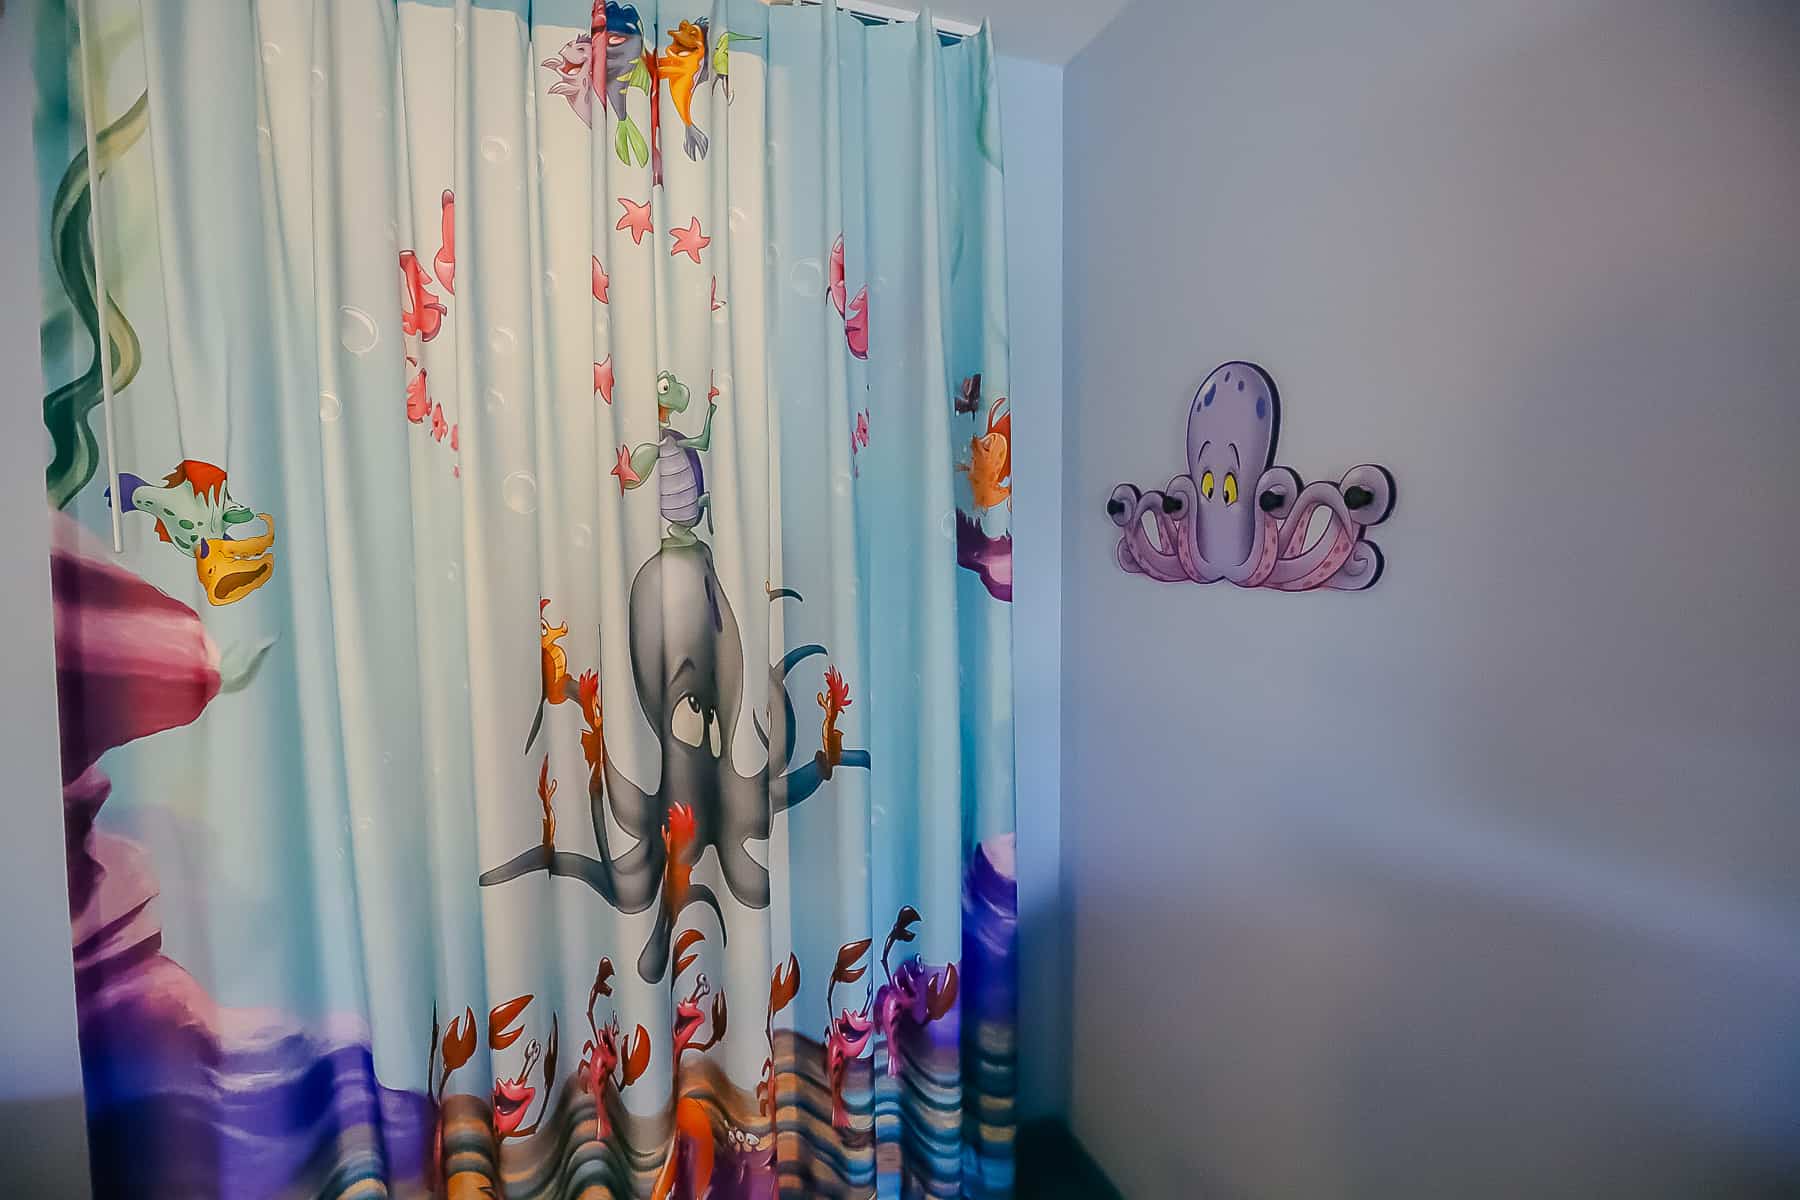 shows the curtain that divides the room from the bath area 